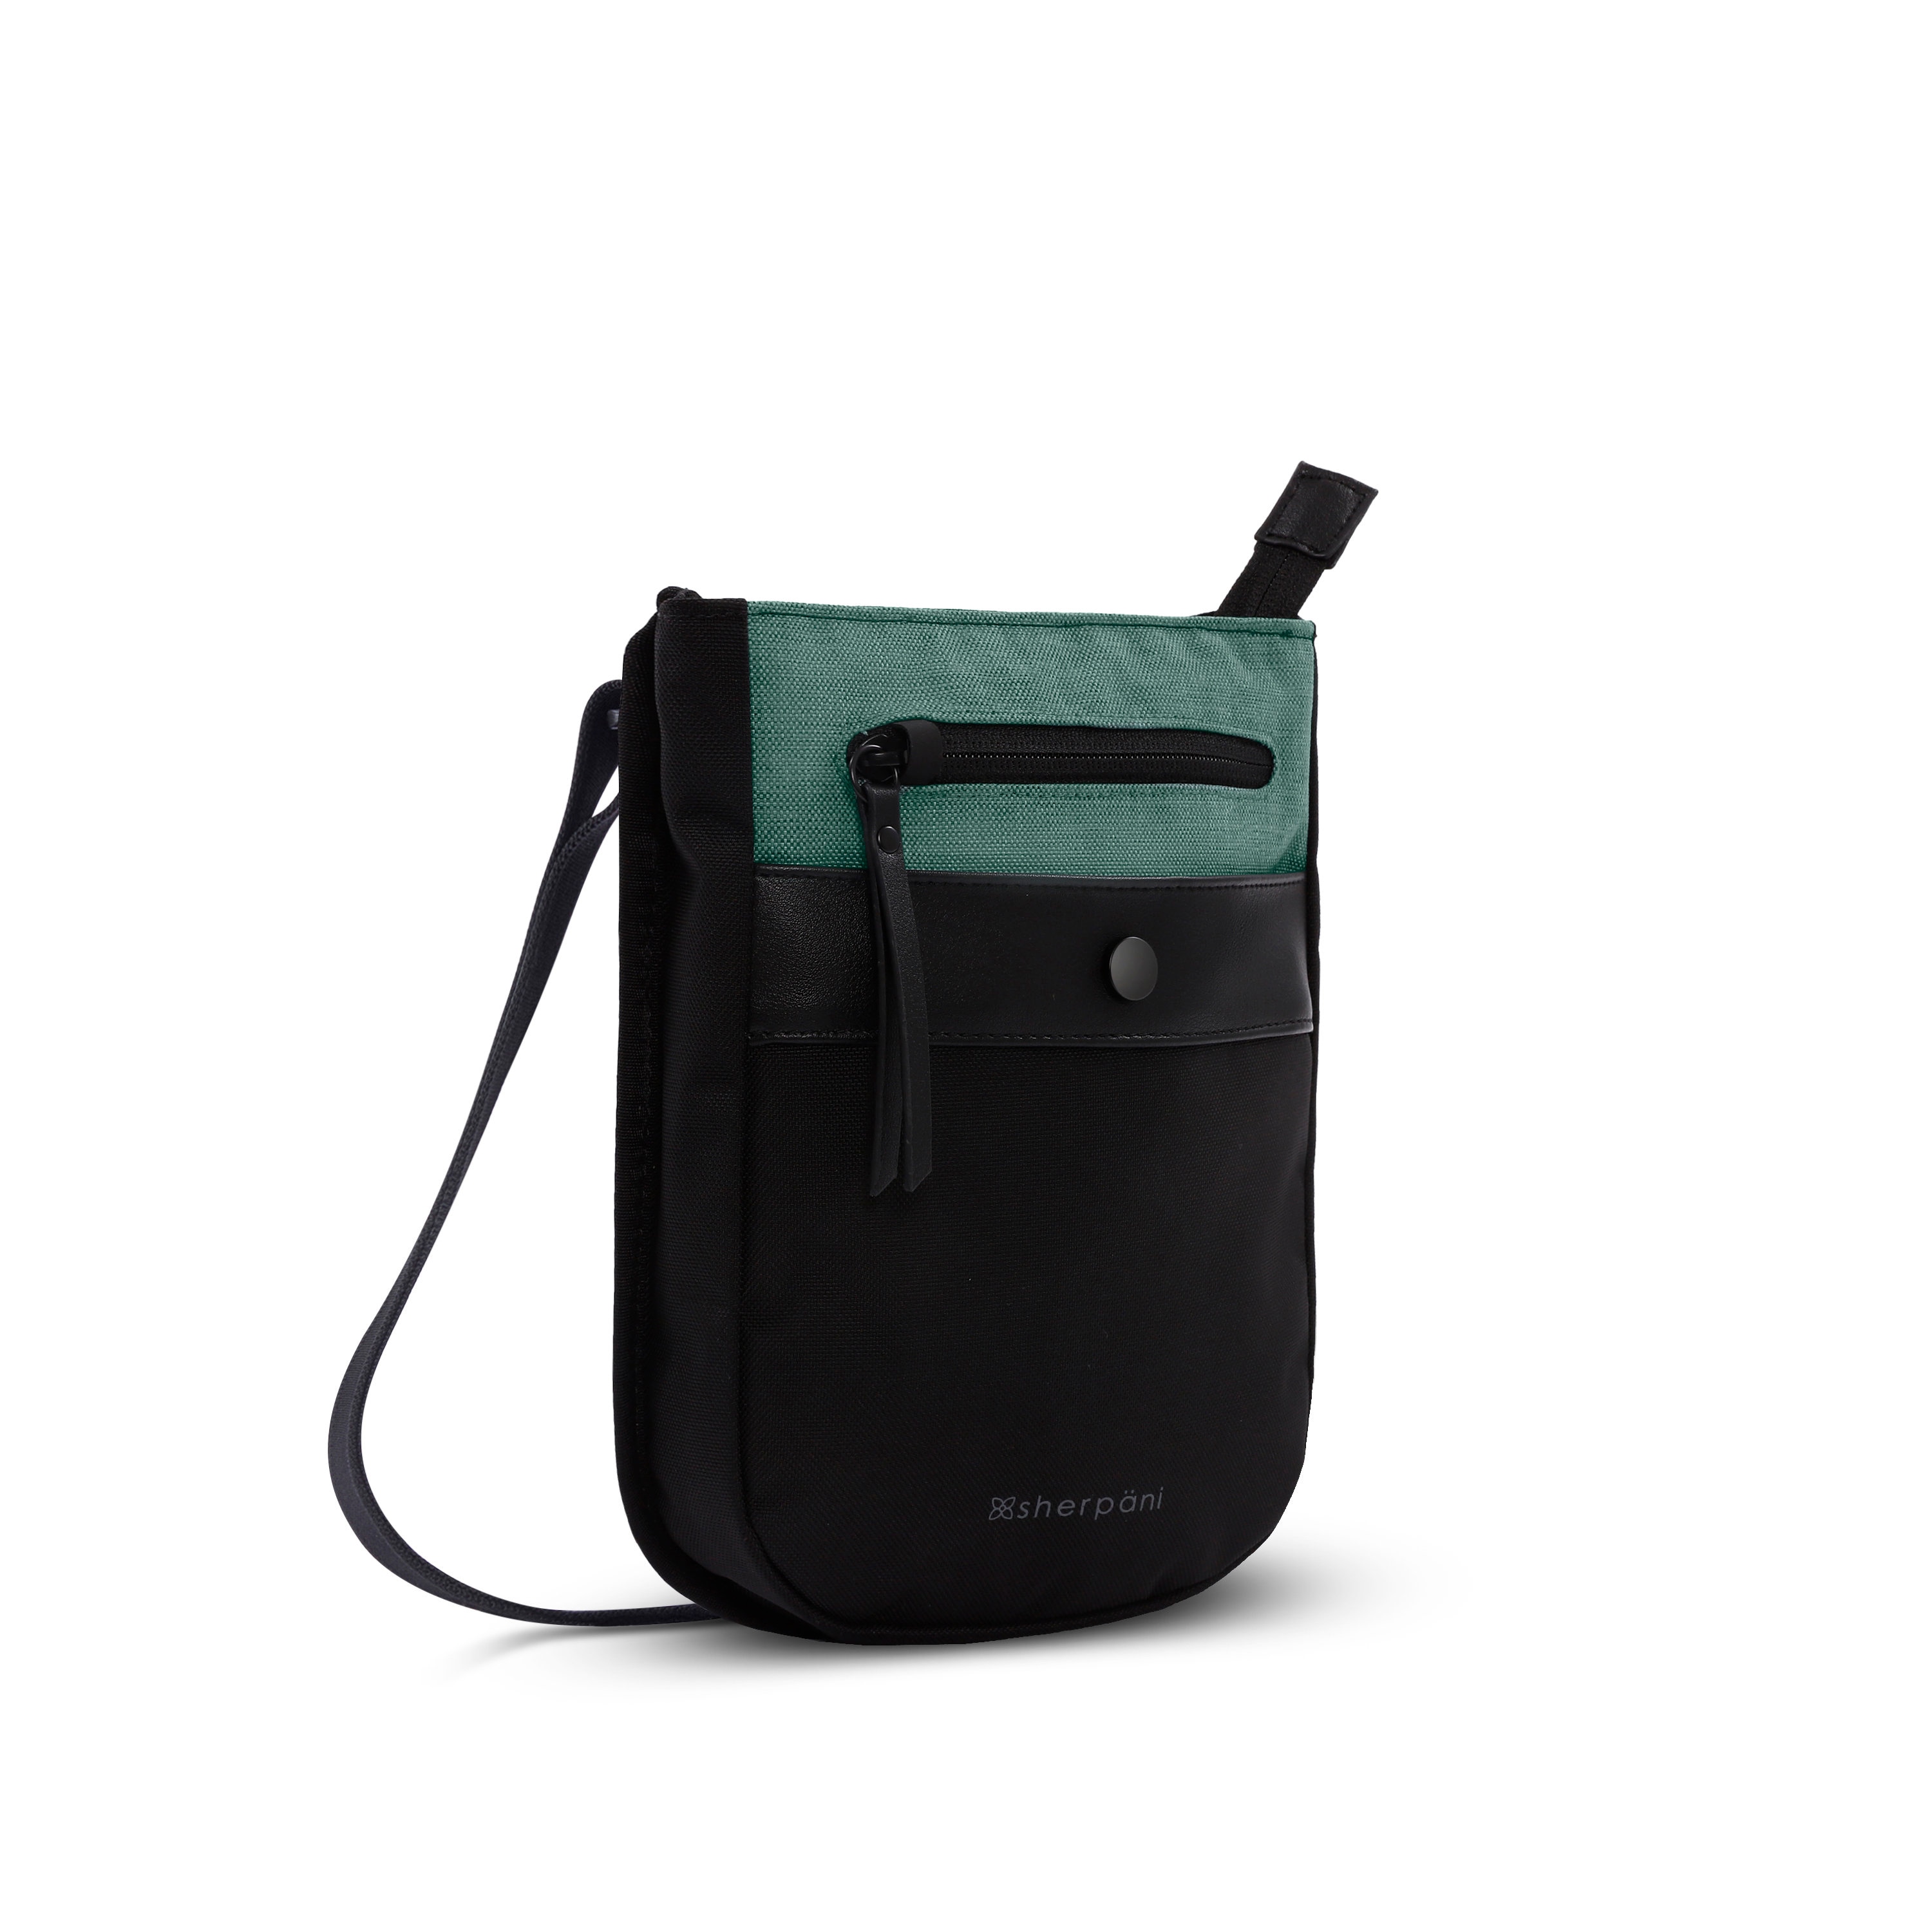 Available in 4 colors Anti-theft Messenger Bag RFID - .de